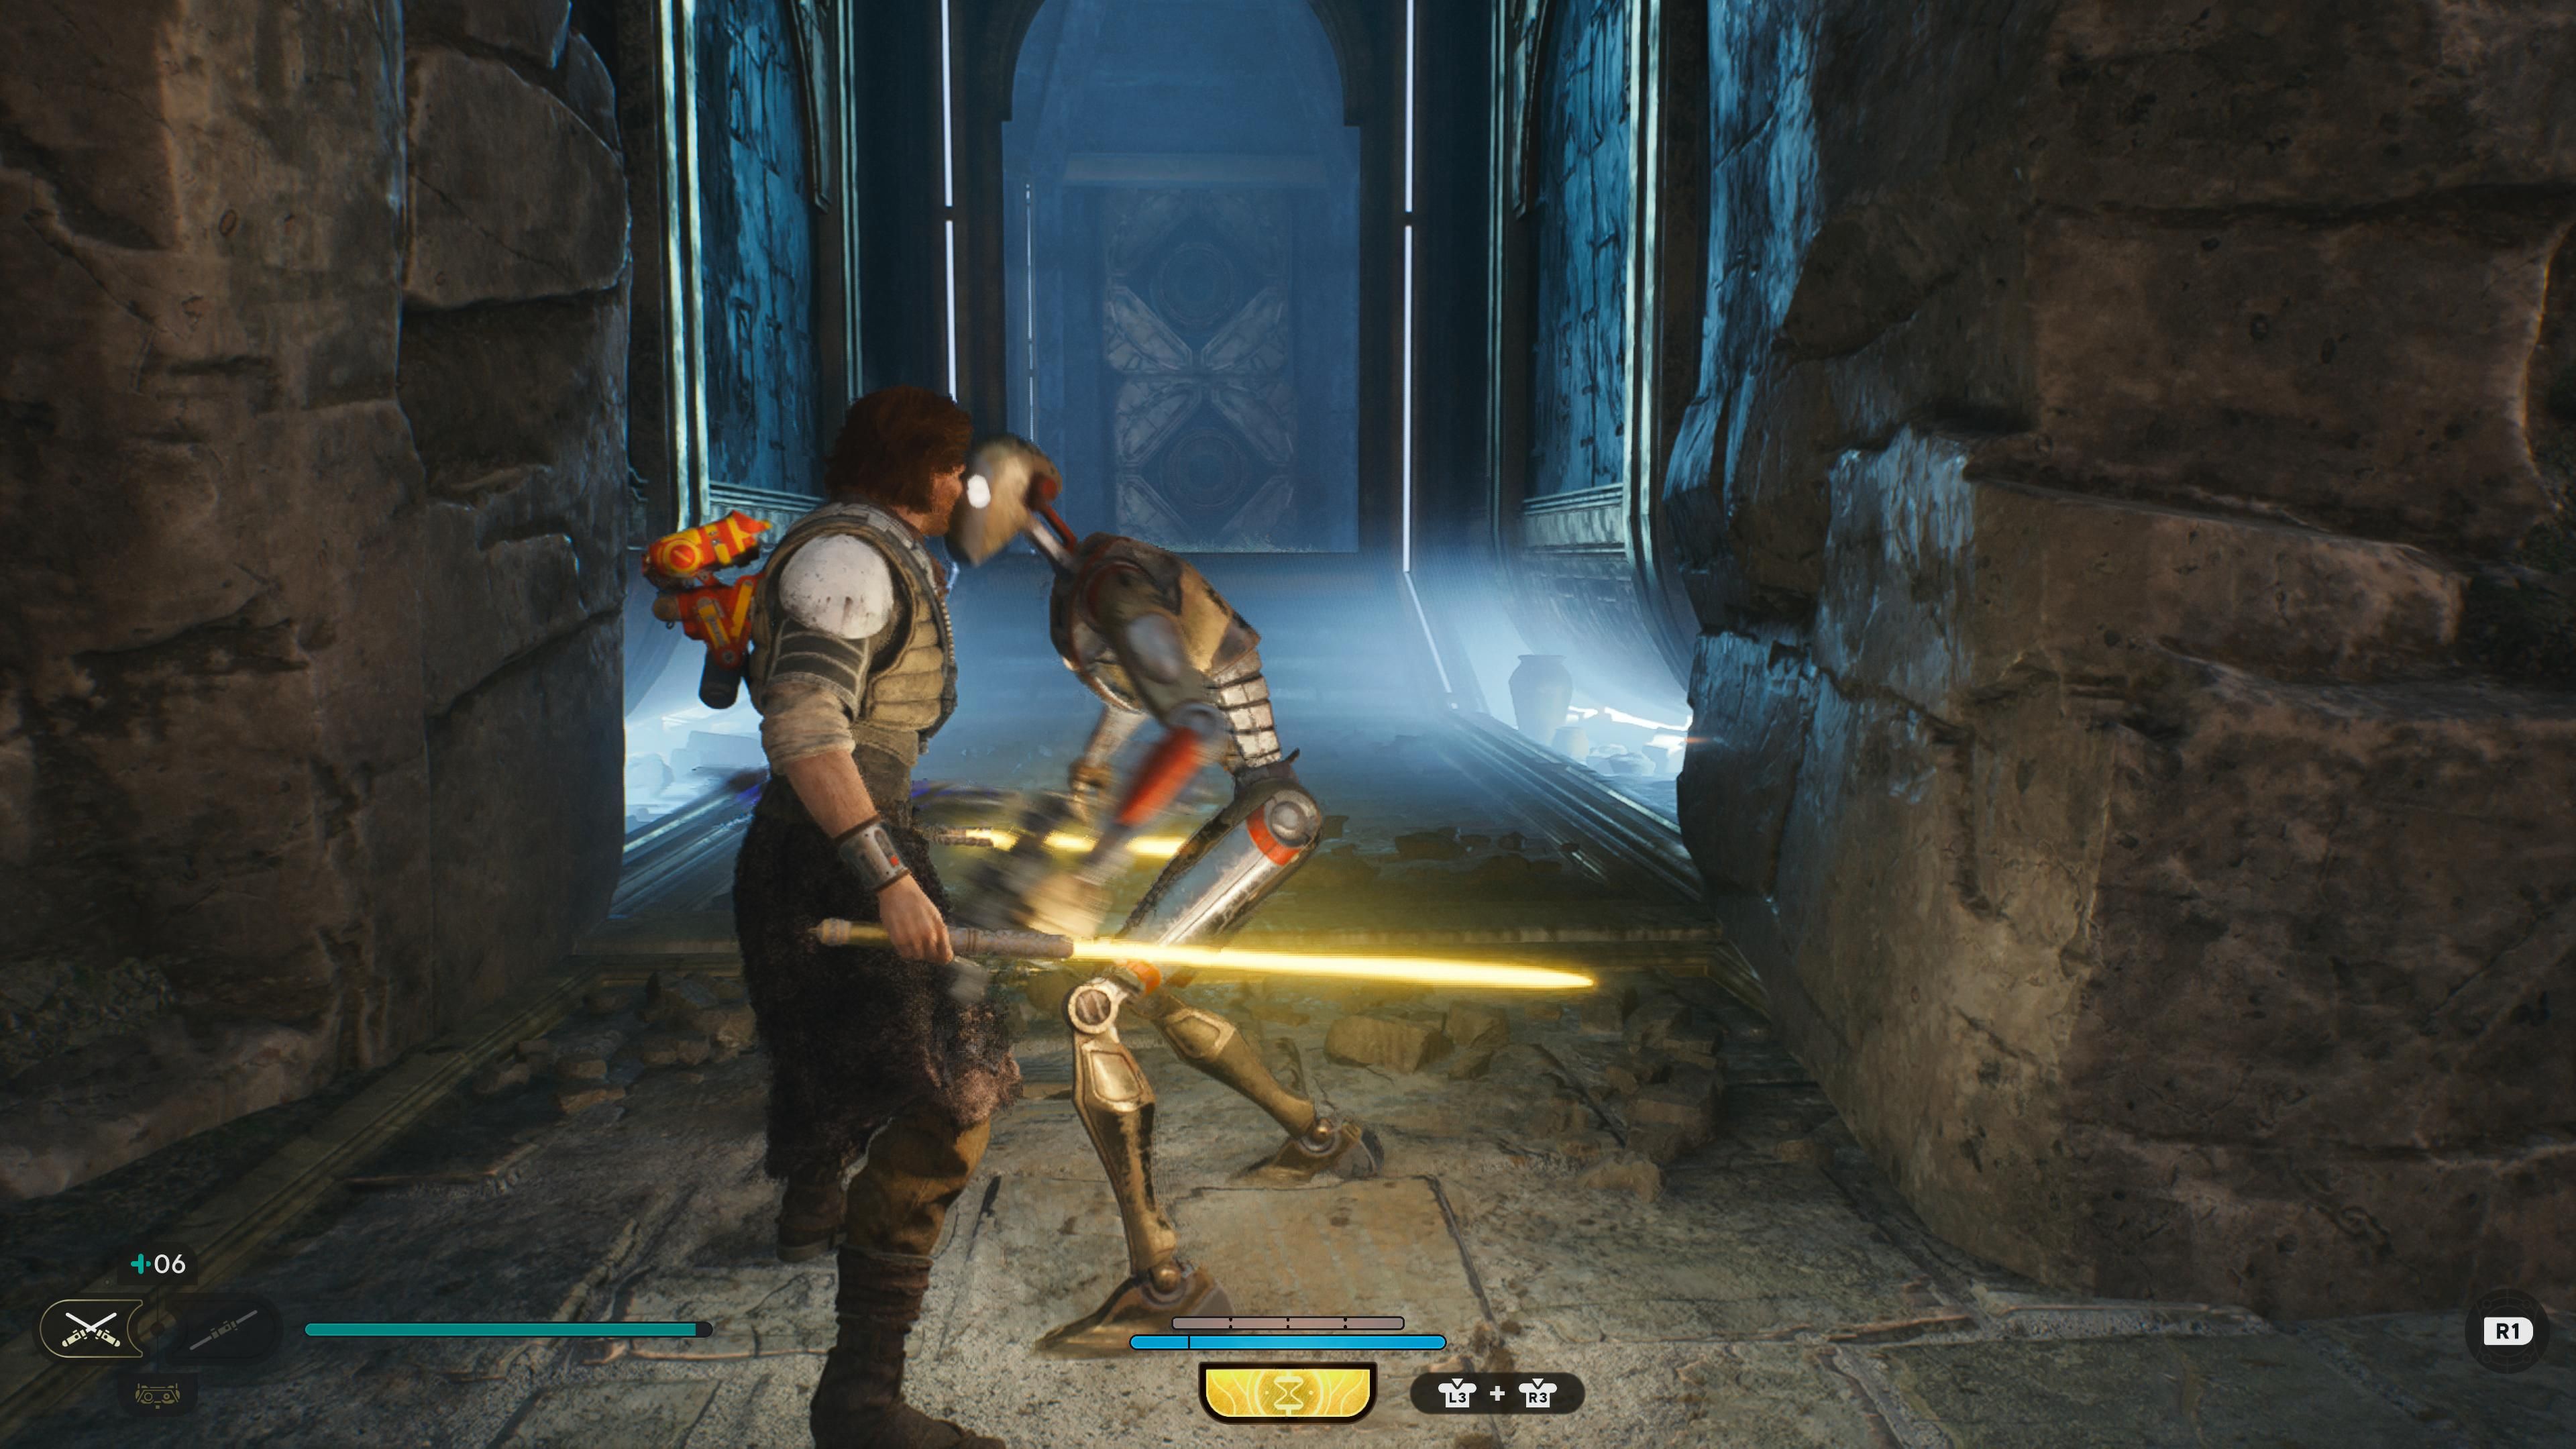 Cal fighting a BX droid in the chamber of Ambidexterity in Jedi Survivor